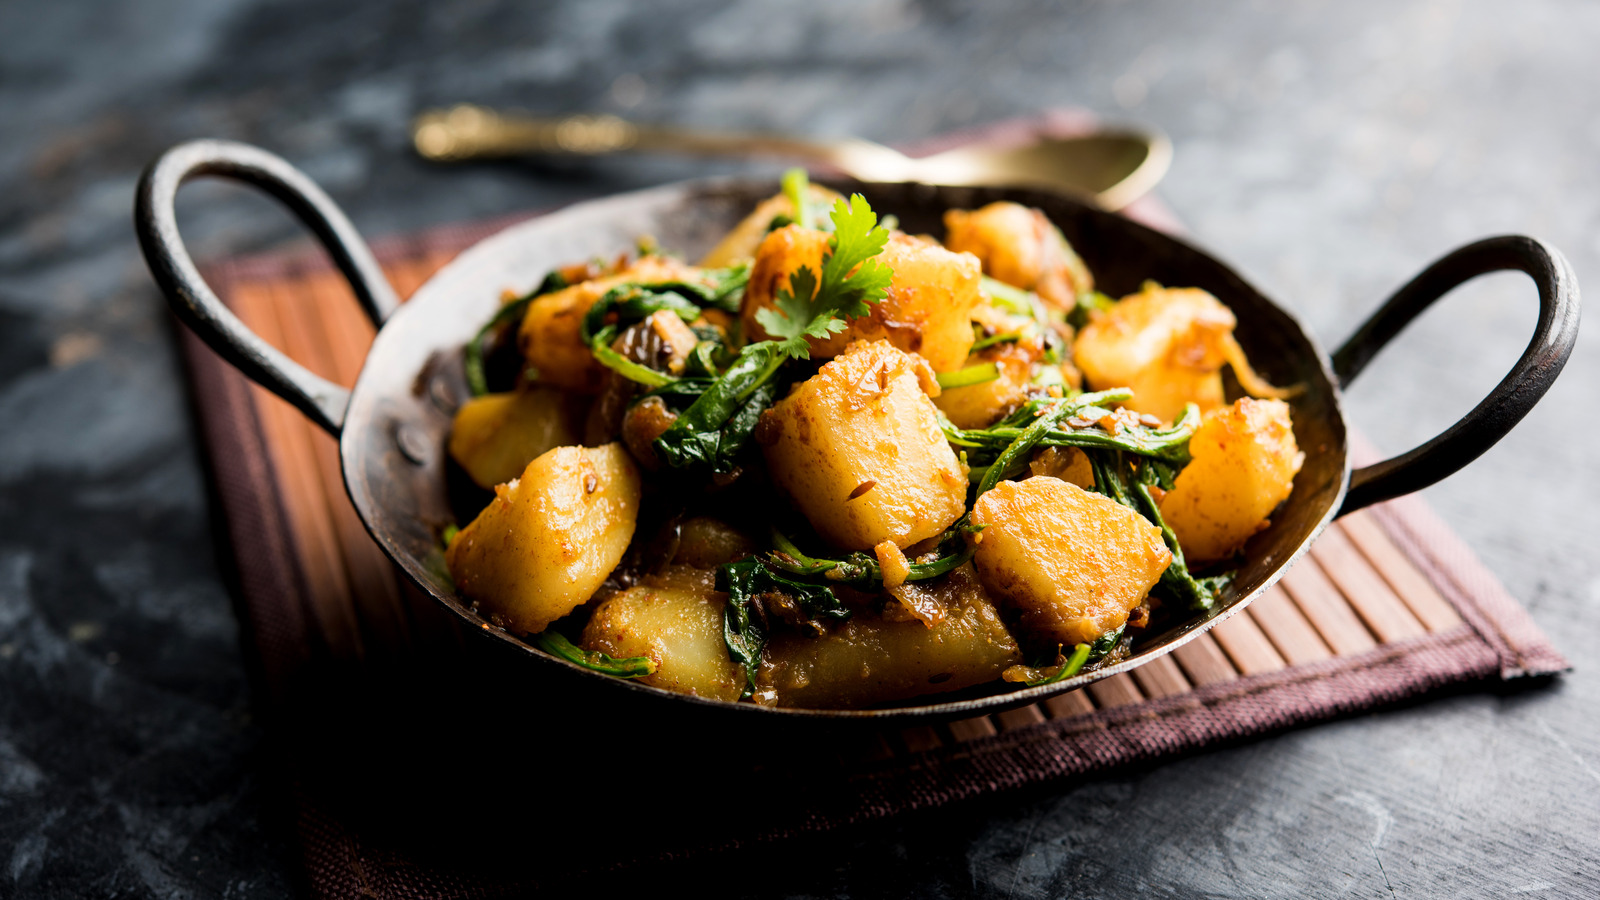 https://www.tastingtable.com/img/gallery/22-indian-potato-dishes-you-should-try-at-least-once/l-intro-1691504727.jpg